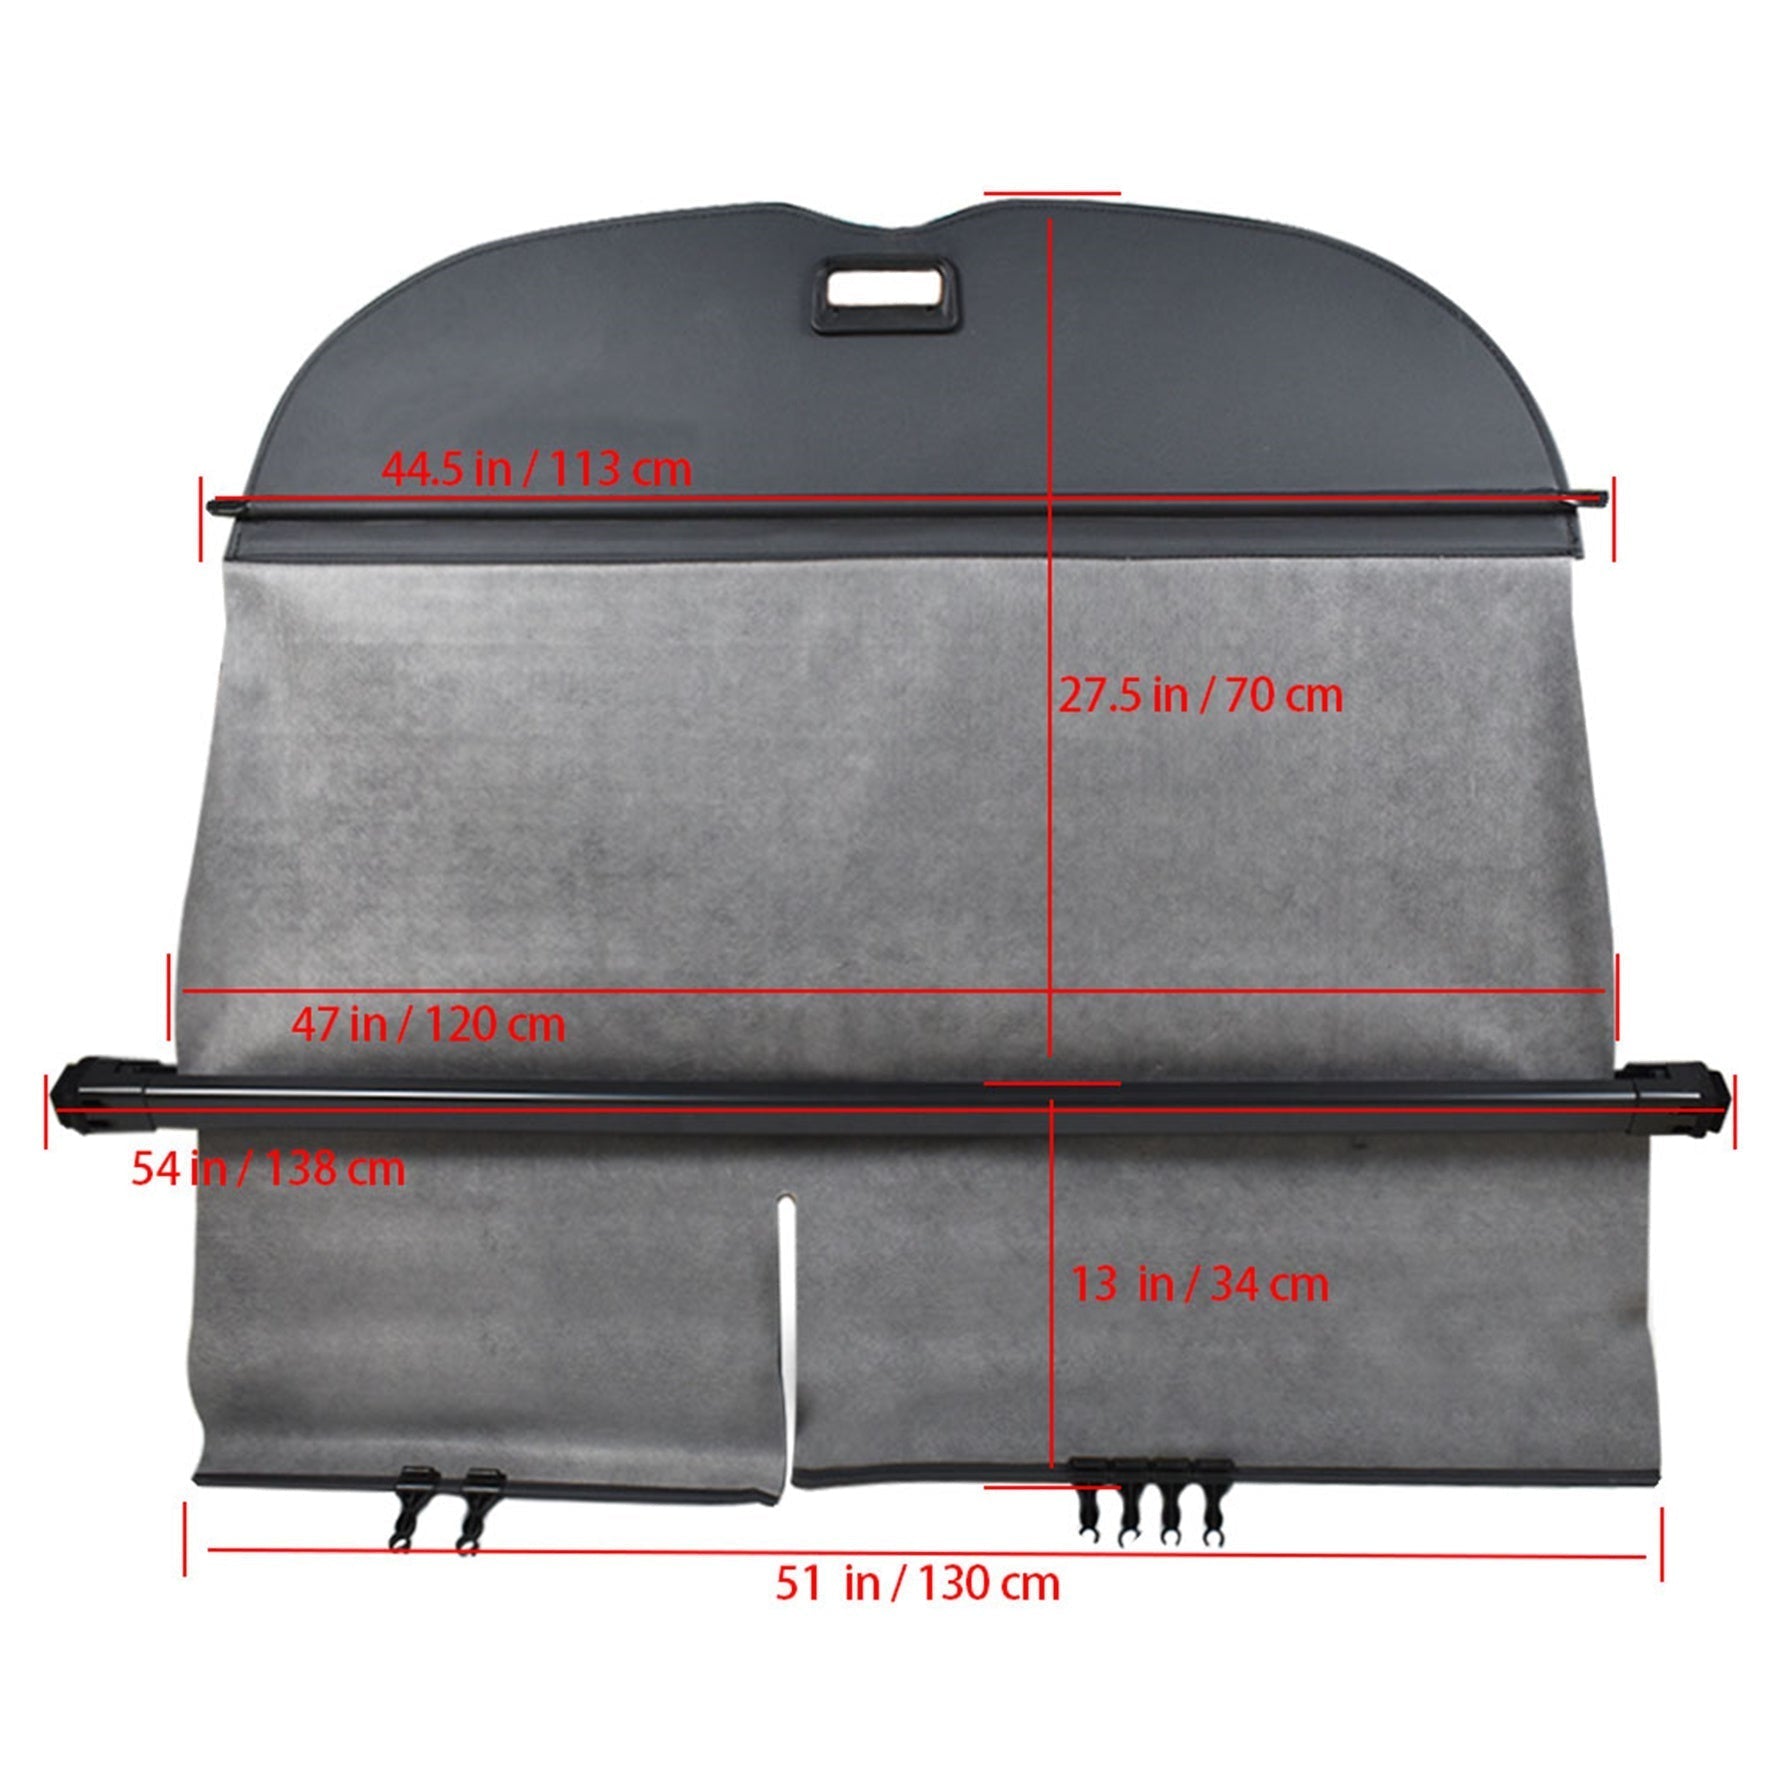 Trunk Cargo Luggage Security Shade Cover Shield For Nissan Murano 2015-2018